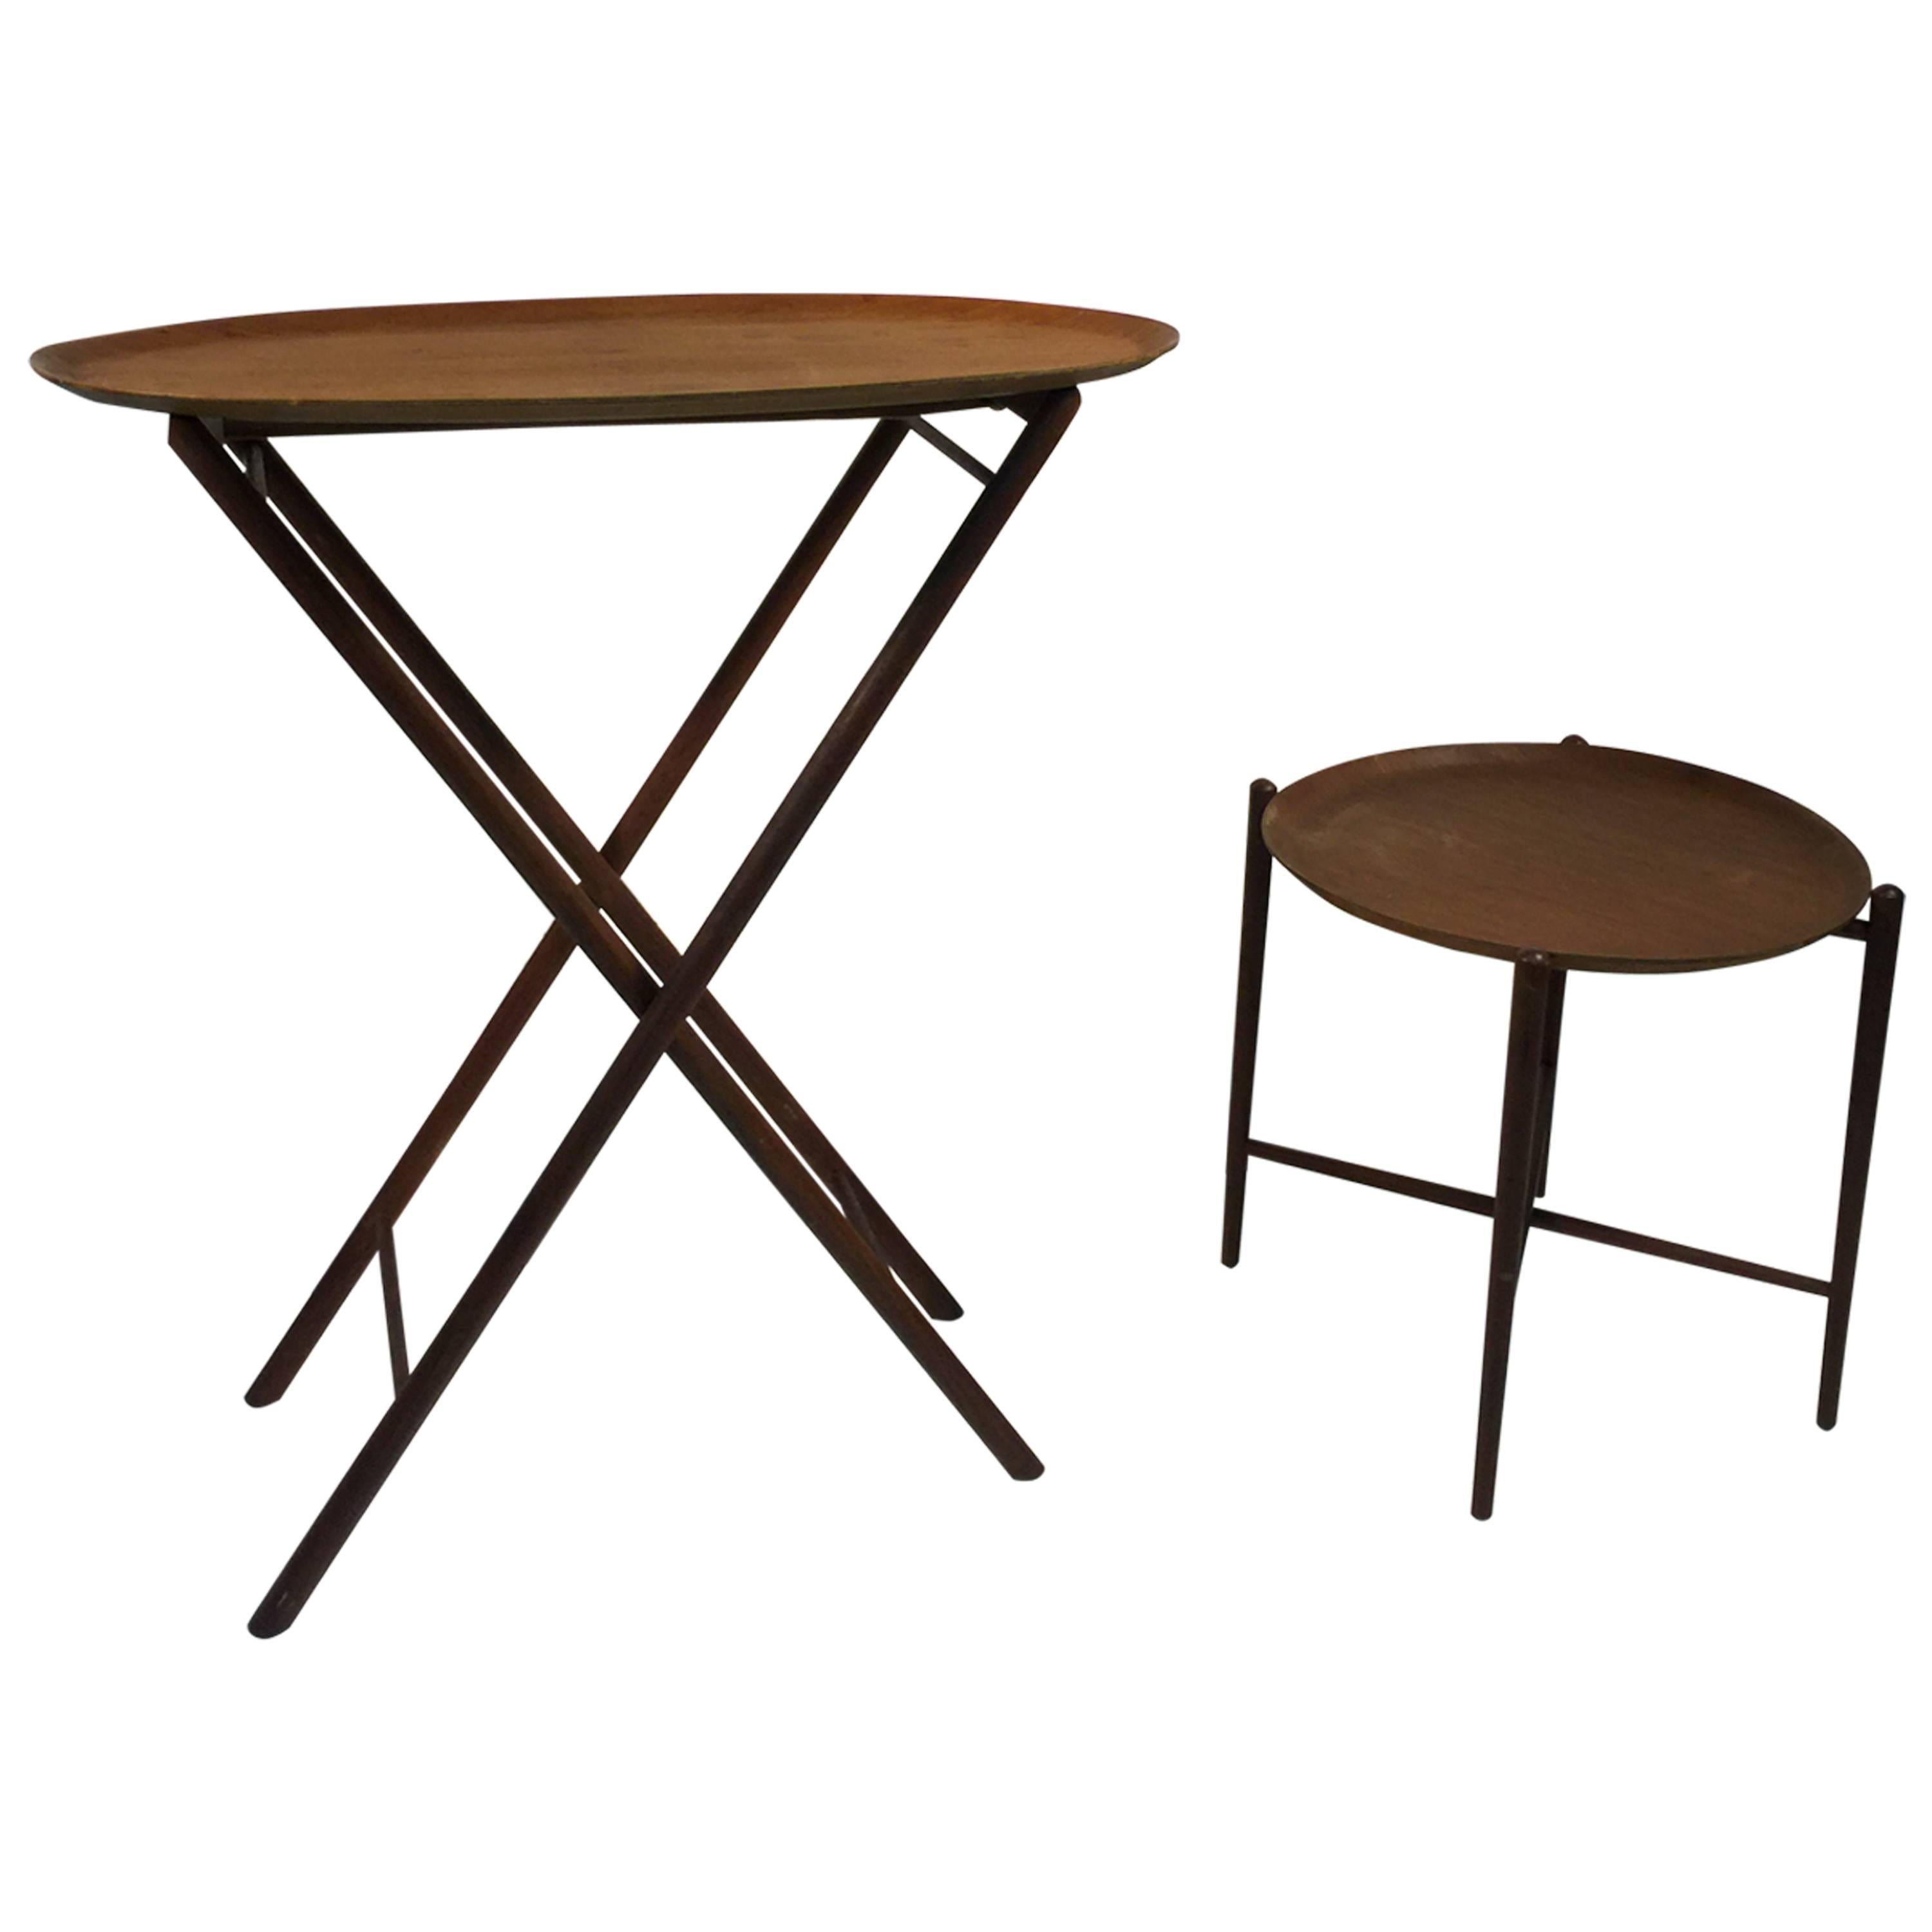 Terrific Set of Two Danish Modern Tray Tables, circa 1970 For Sale